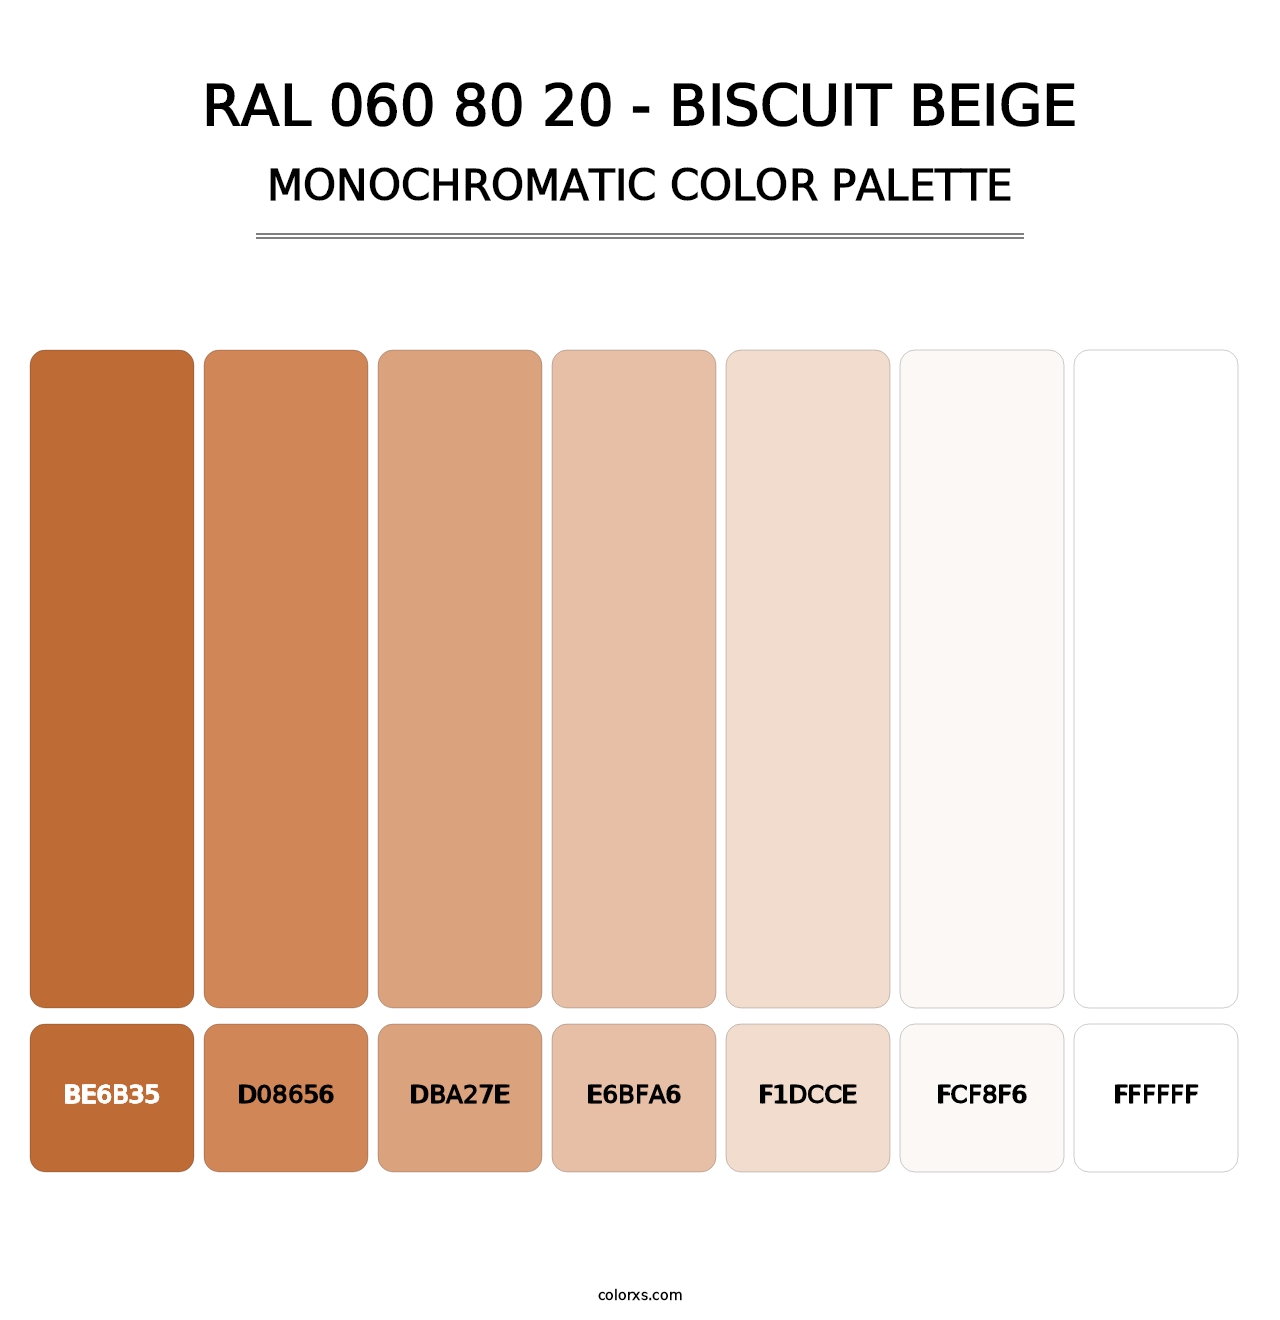 RAL 060 80 20 - Biscuit Beige - Monochromatic Color Palette